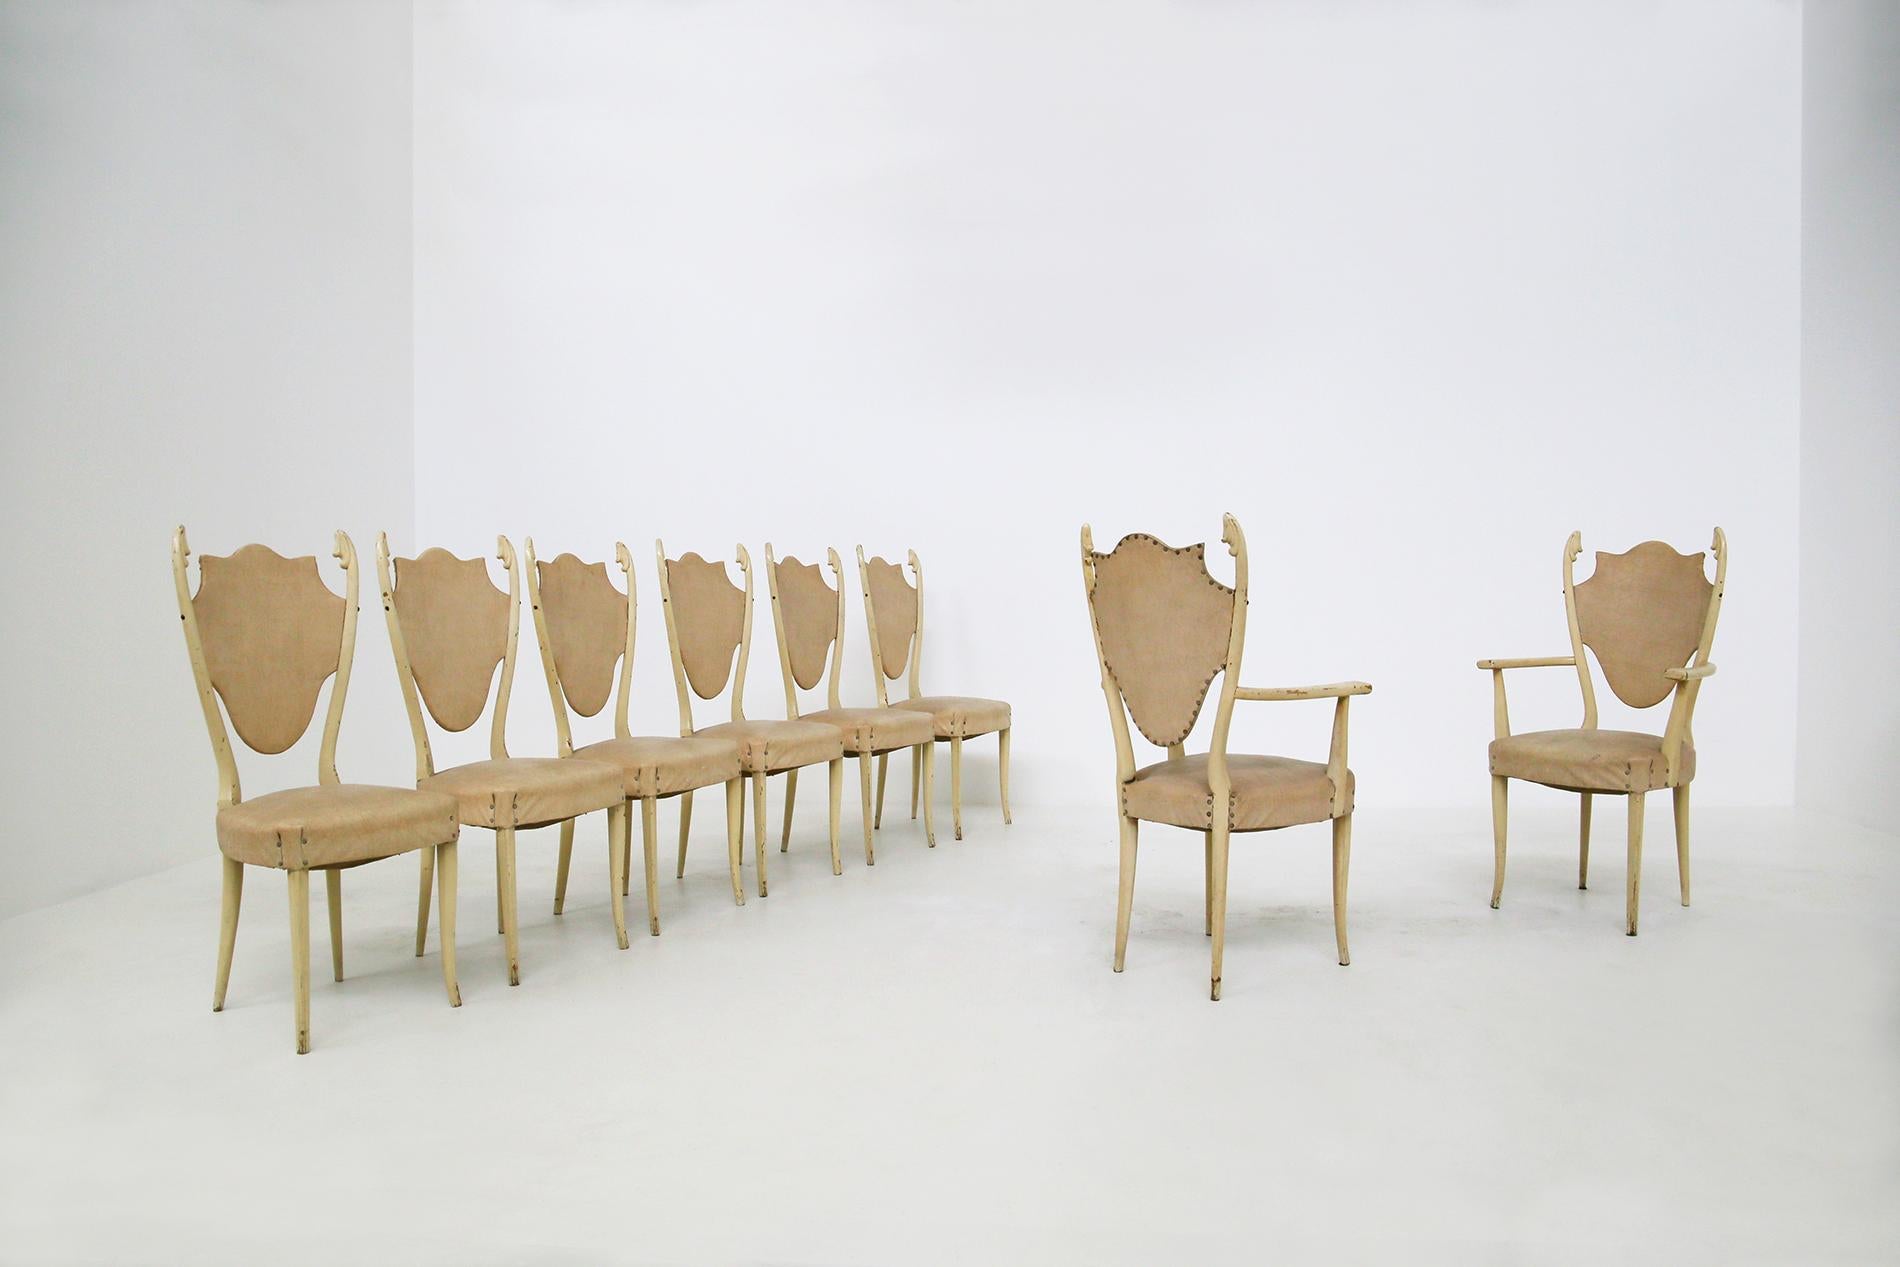 Sculptural Italian chairs of the 1950s, designed by Carlo Enrico Rava. The chairs are in white lacquered ashwood. The set consists of two table heads and four diners. Their eccentricity is its wood carved in the tips of each seat, almost reminiscent